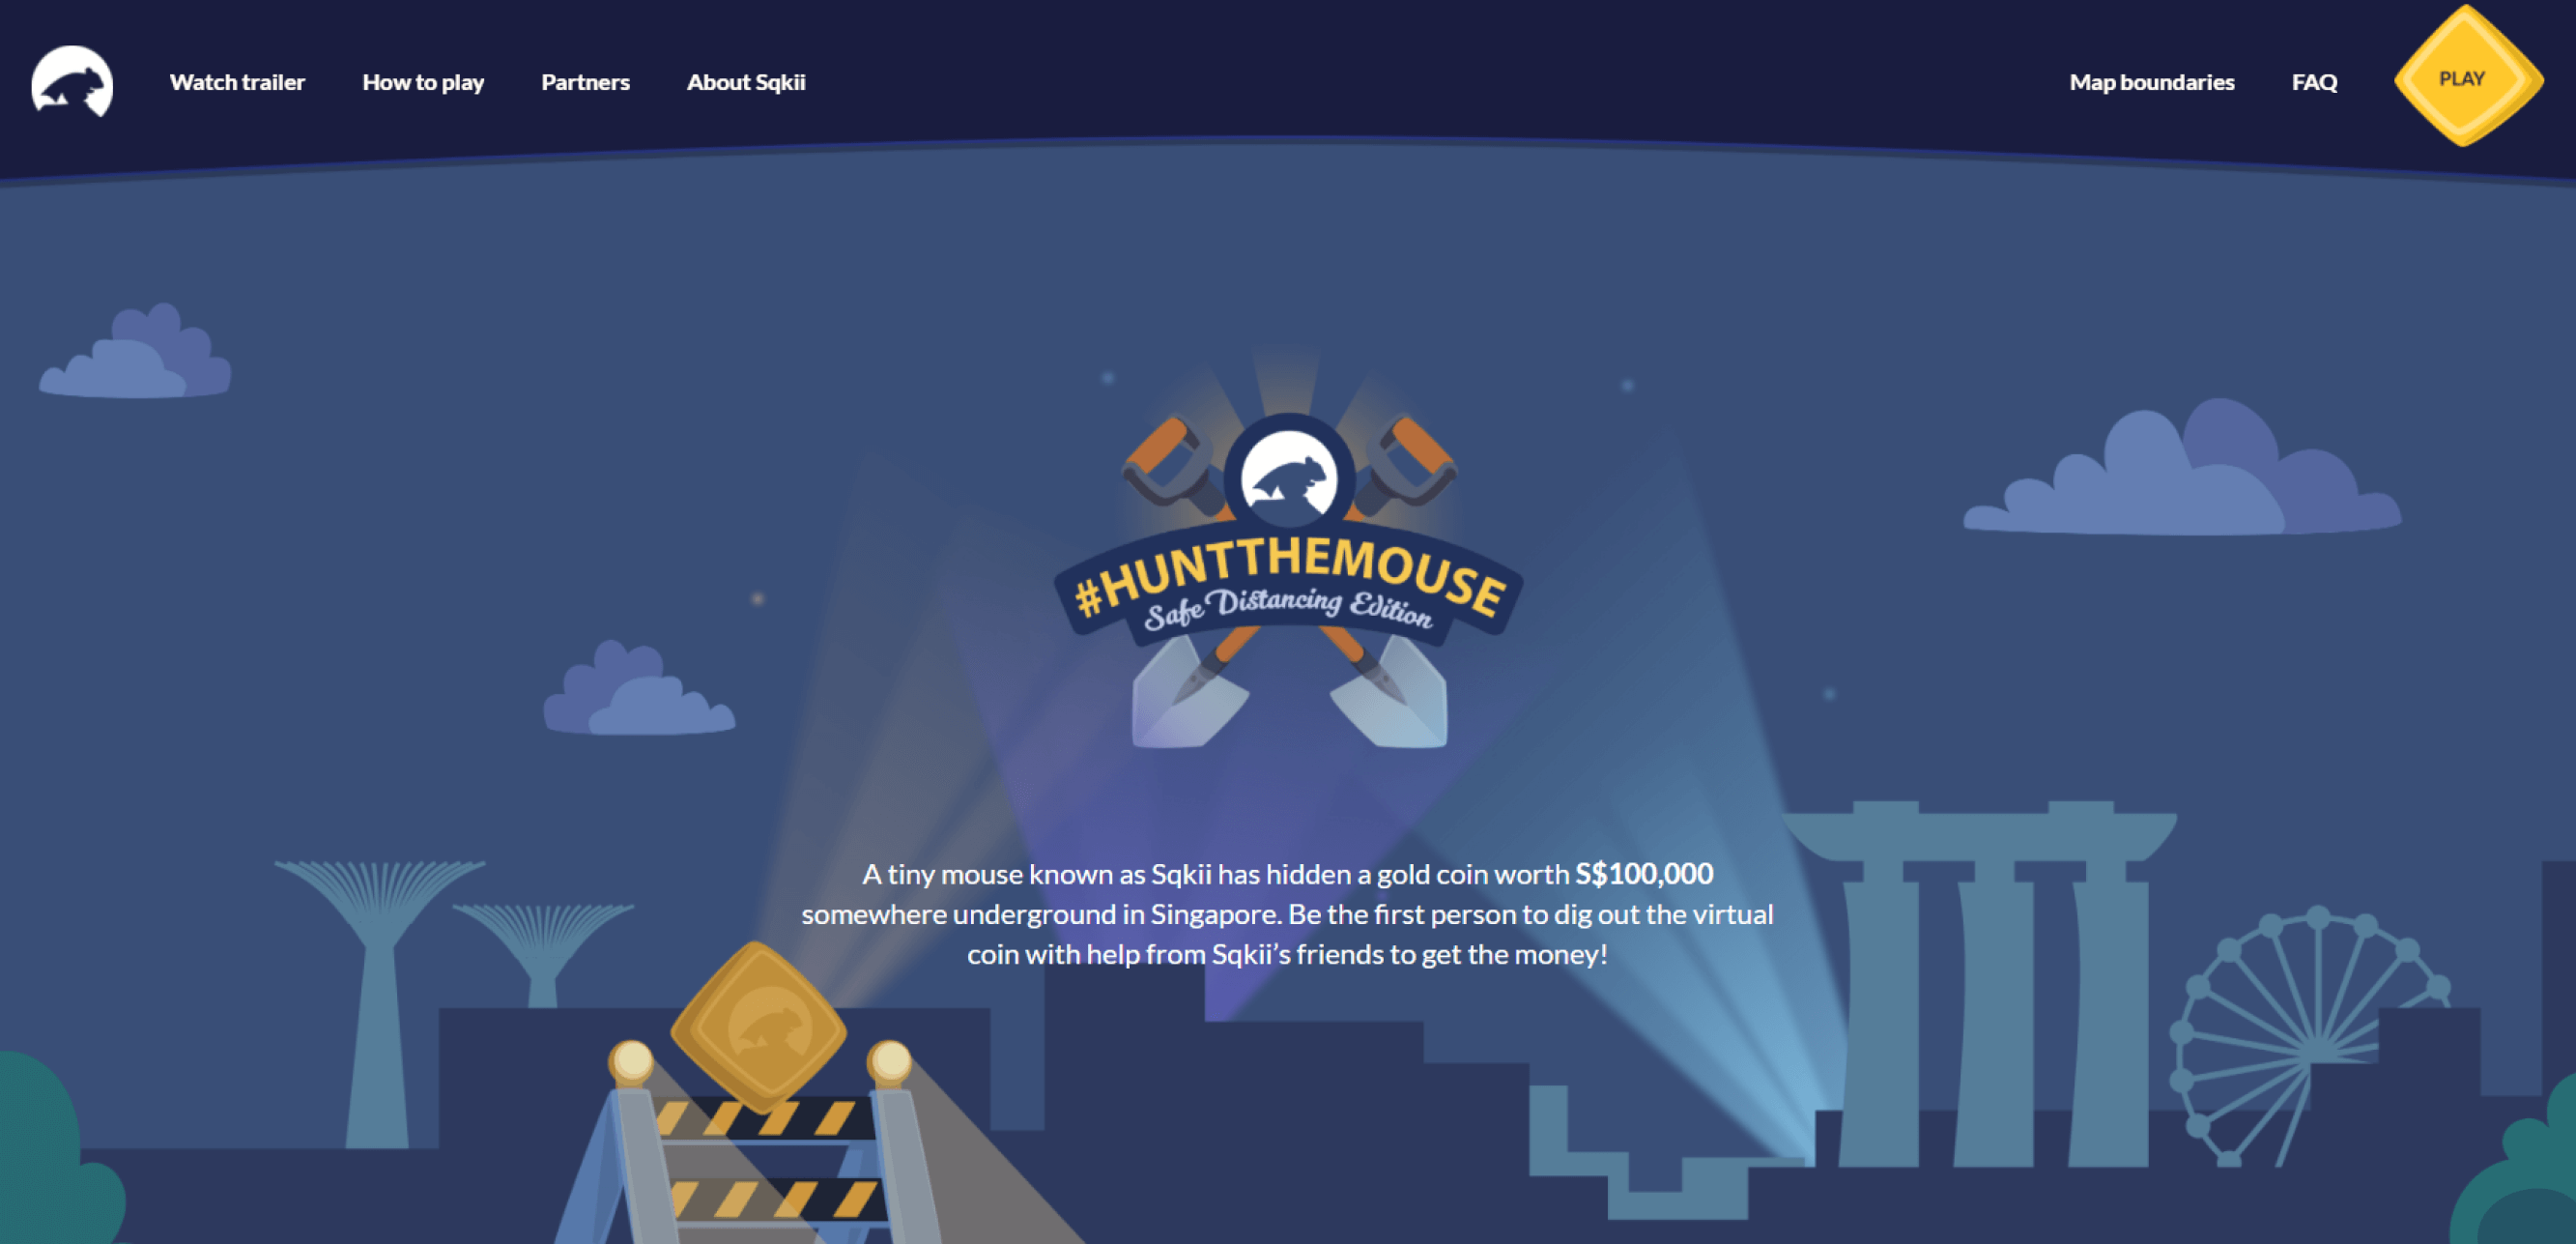 TheVisualTeam_Sqkii_hunt_the_mouse_thumbnail